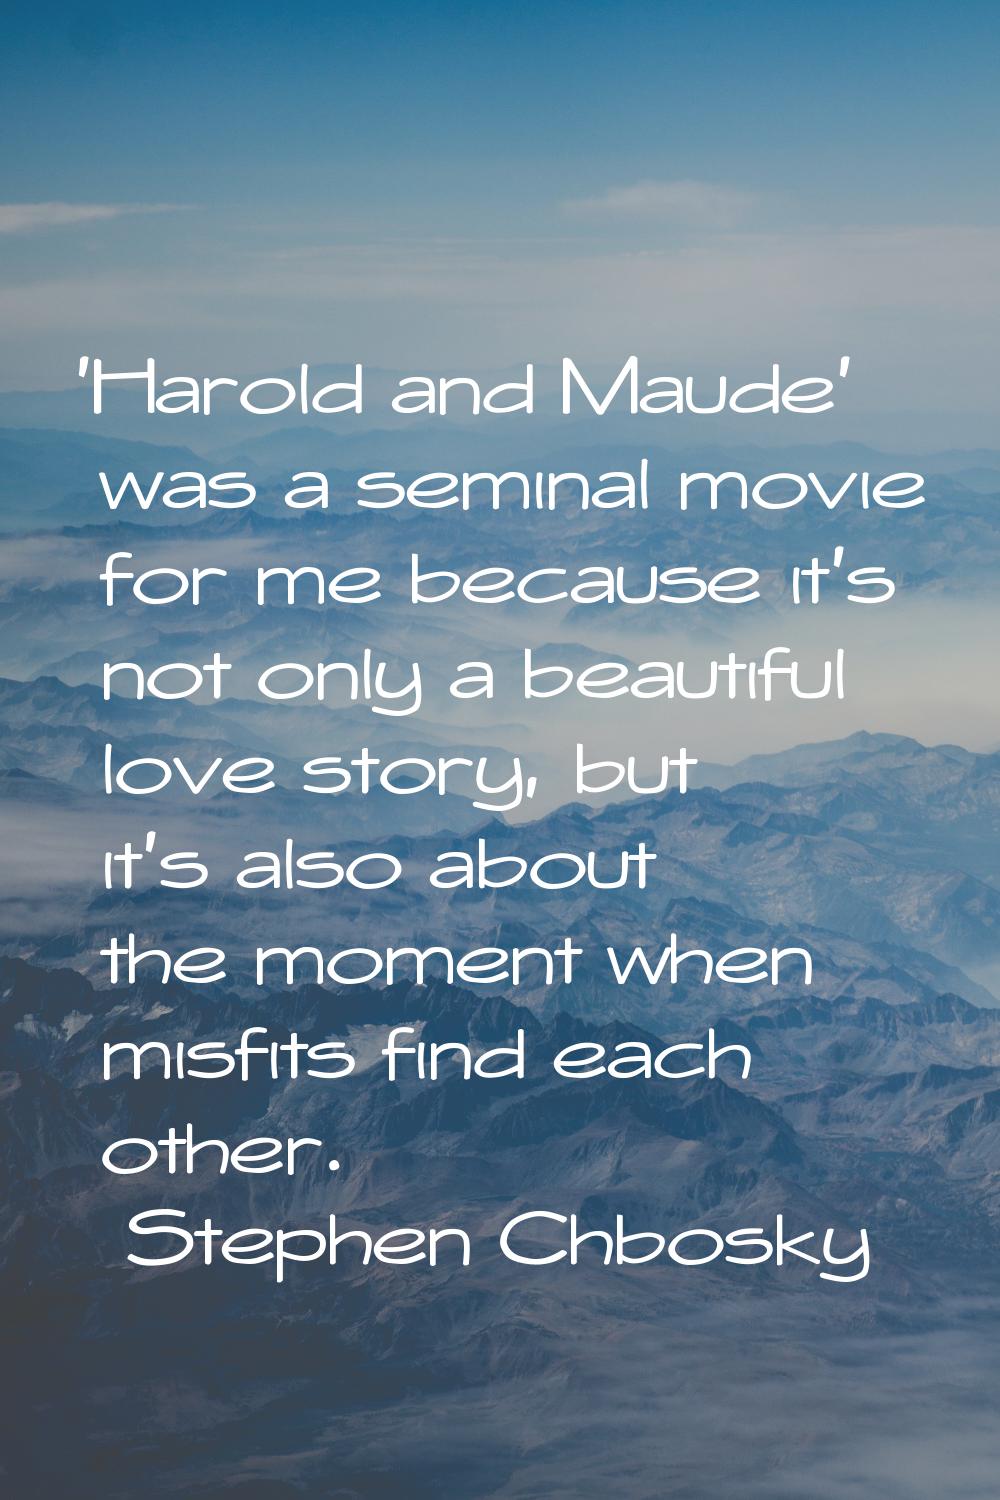 'Harold and Maude' was a seminal movie for me because it's not only a beautiful love story, but it'